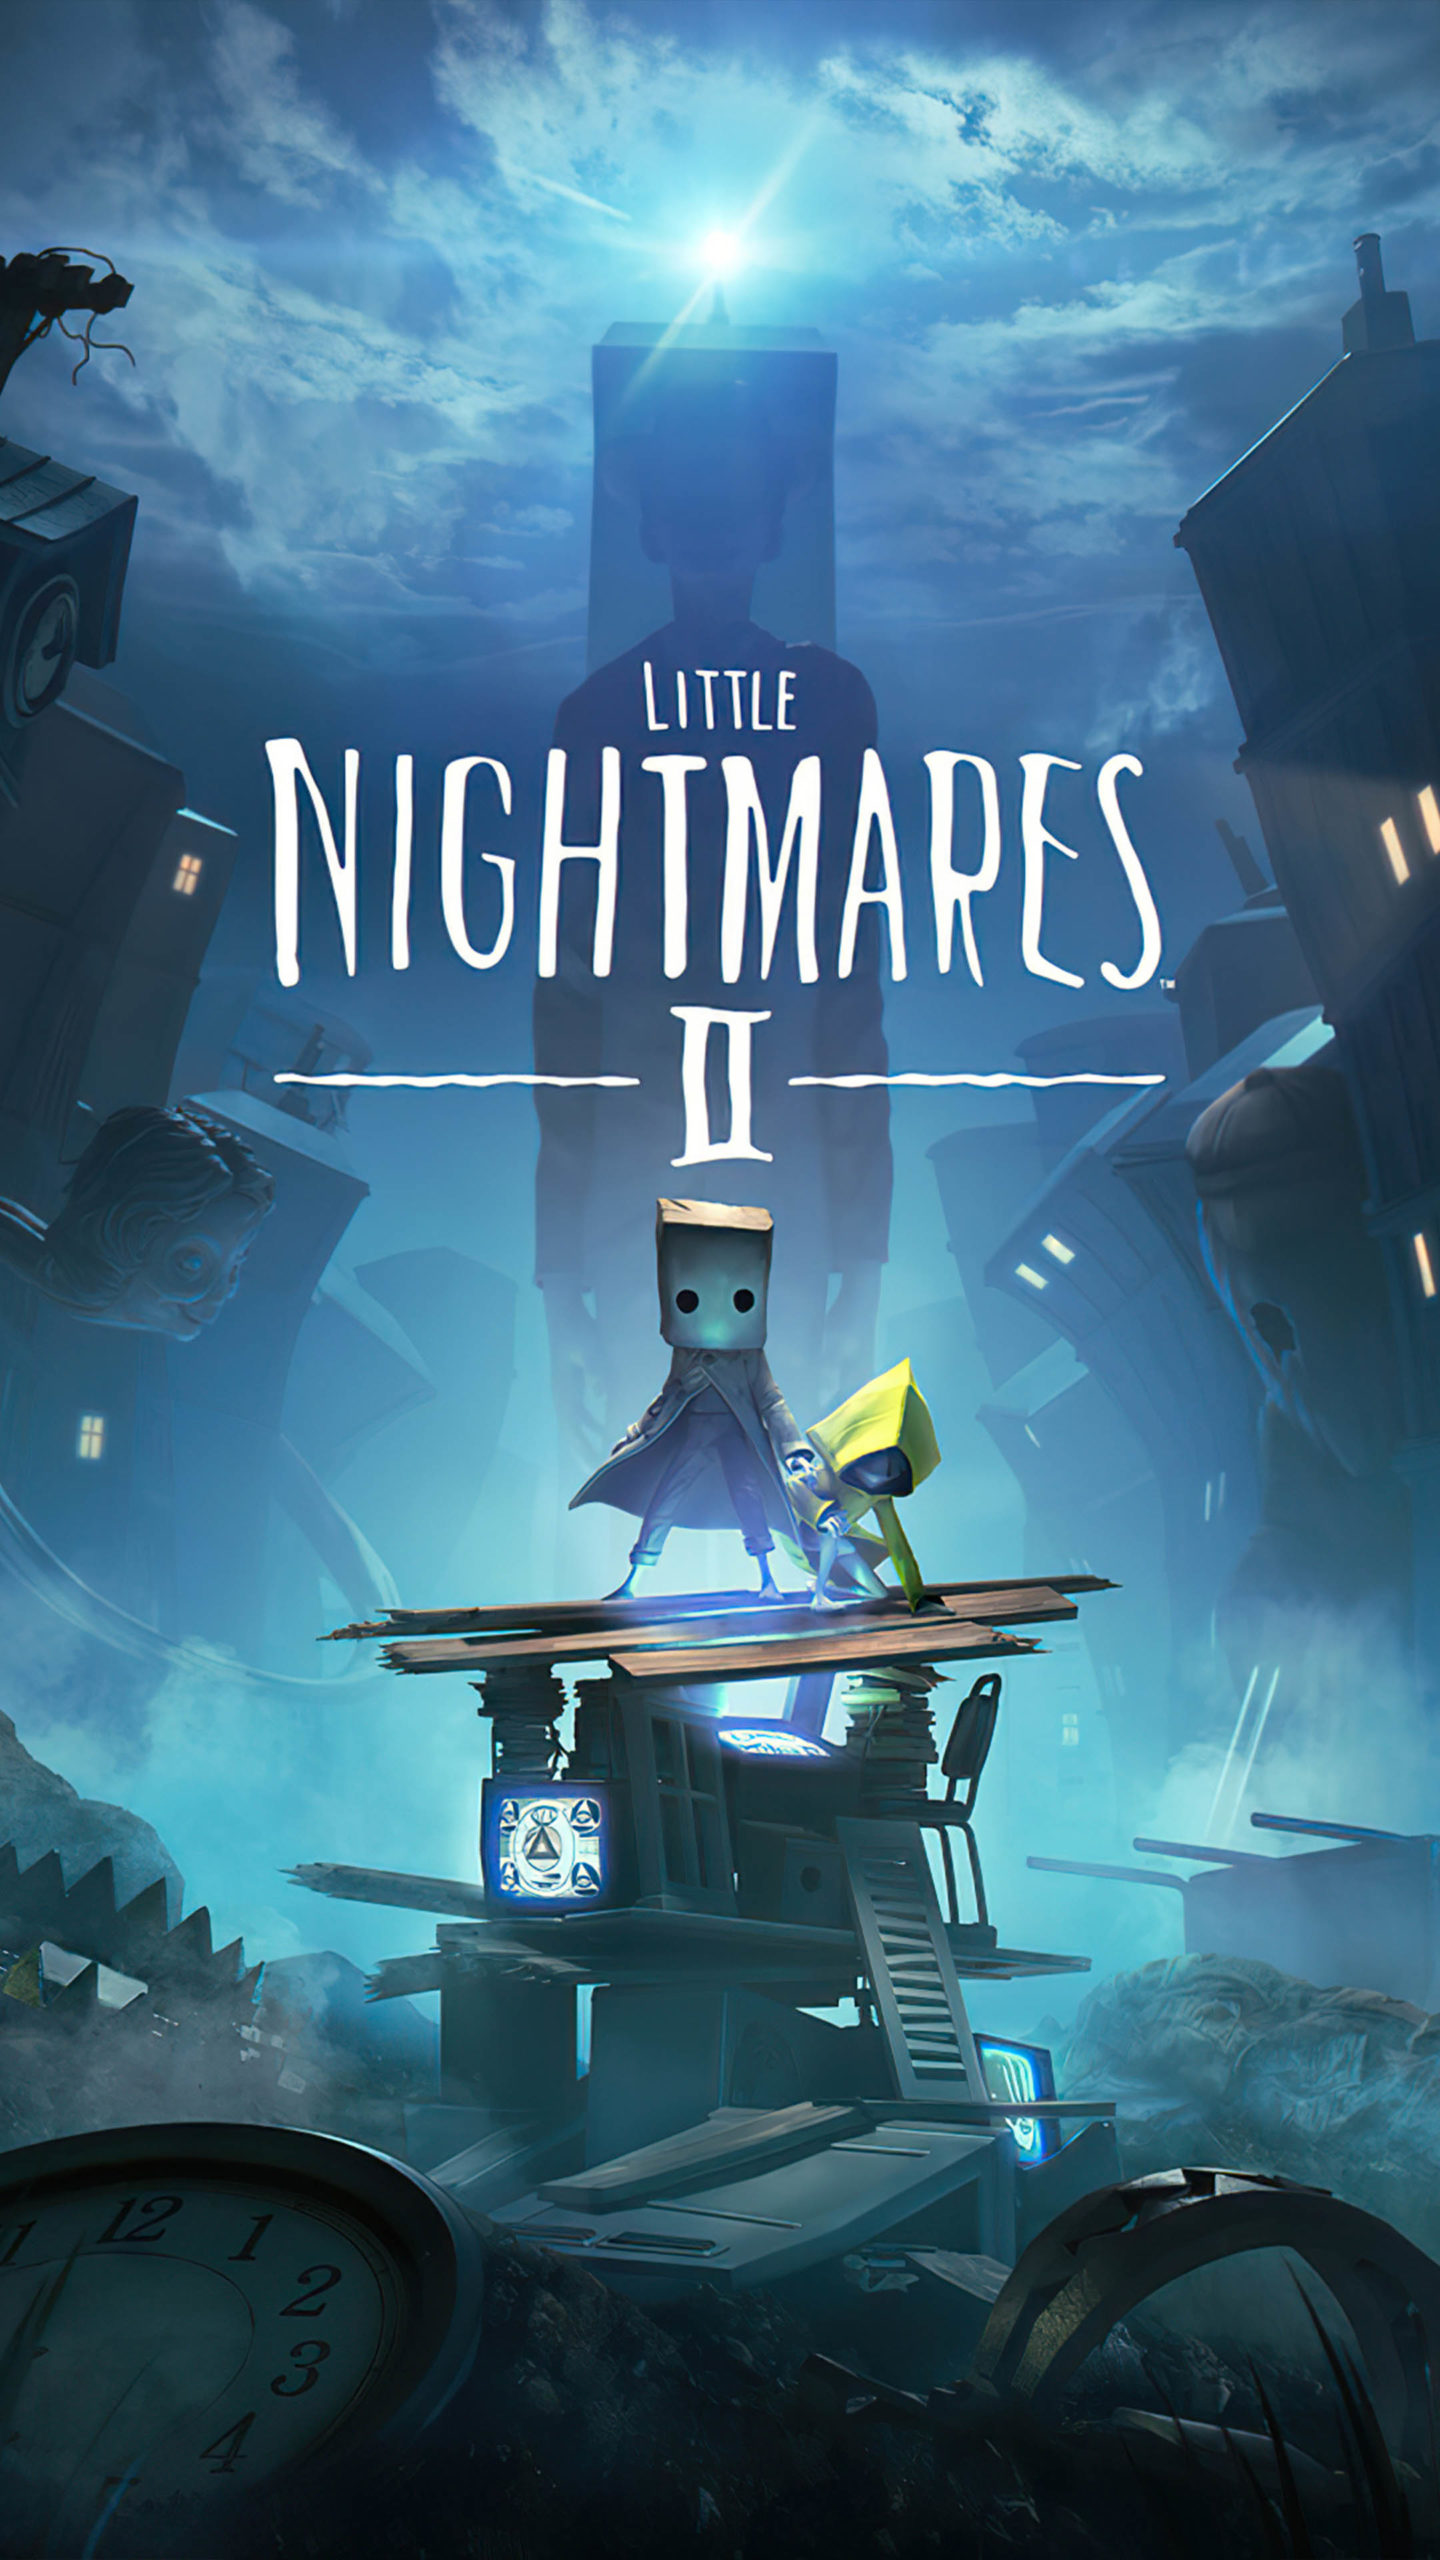 Little Nightmares 2 Game Poster 4K Ultra HD Mobile Wallpaper Scaled 